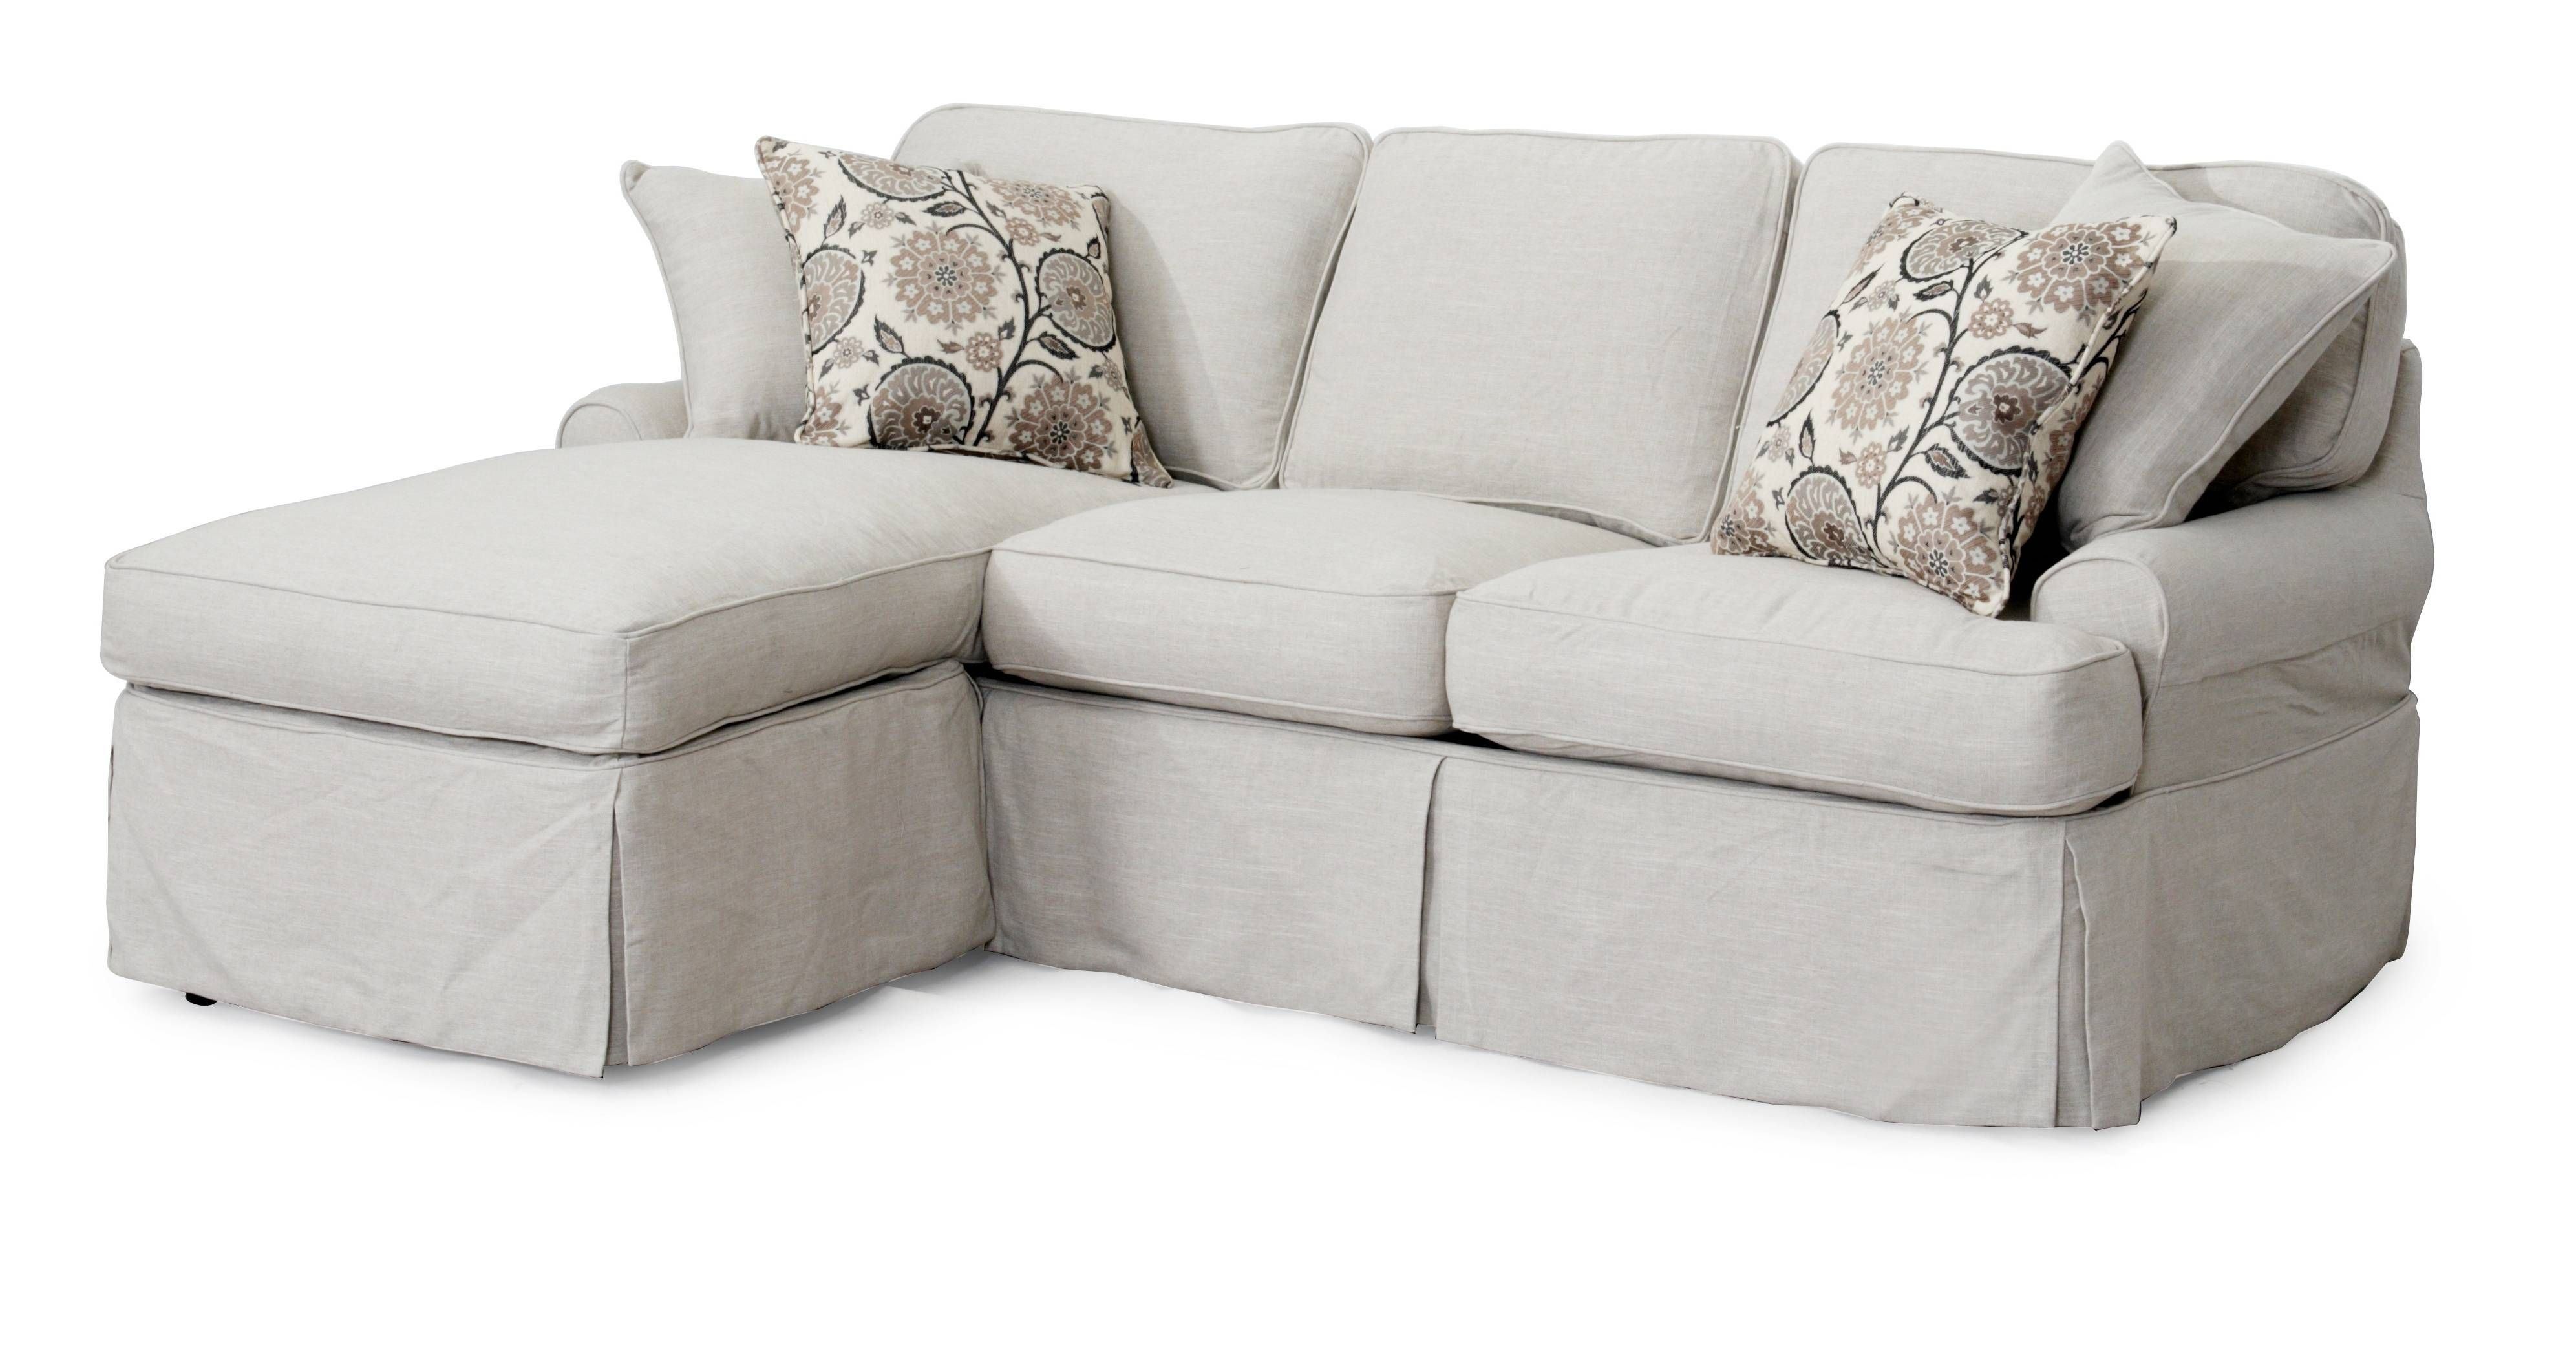 Furniture: Oversized Chair Slipcovers To Keep Your Furniture Clean Inside Walmart Slipcovers For Sofas (View 20 of 30)